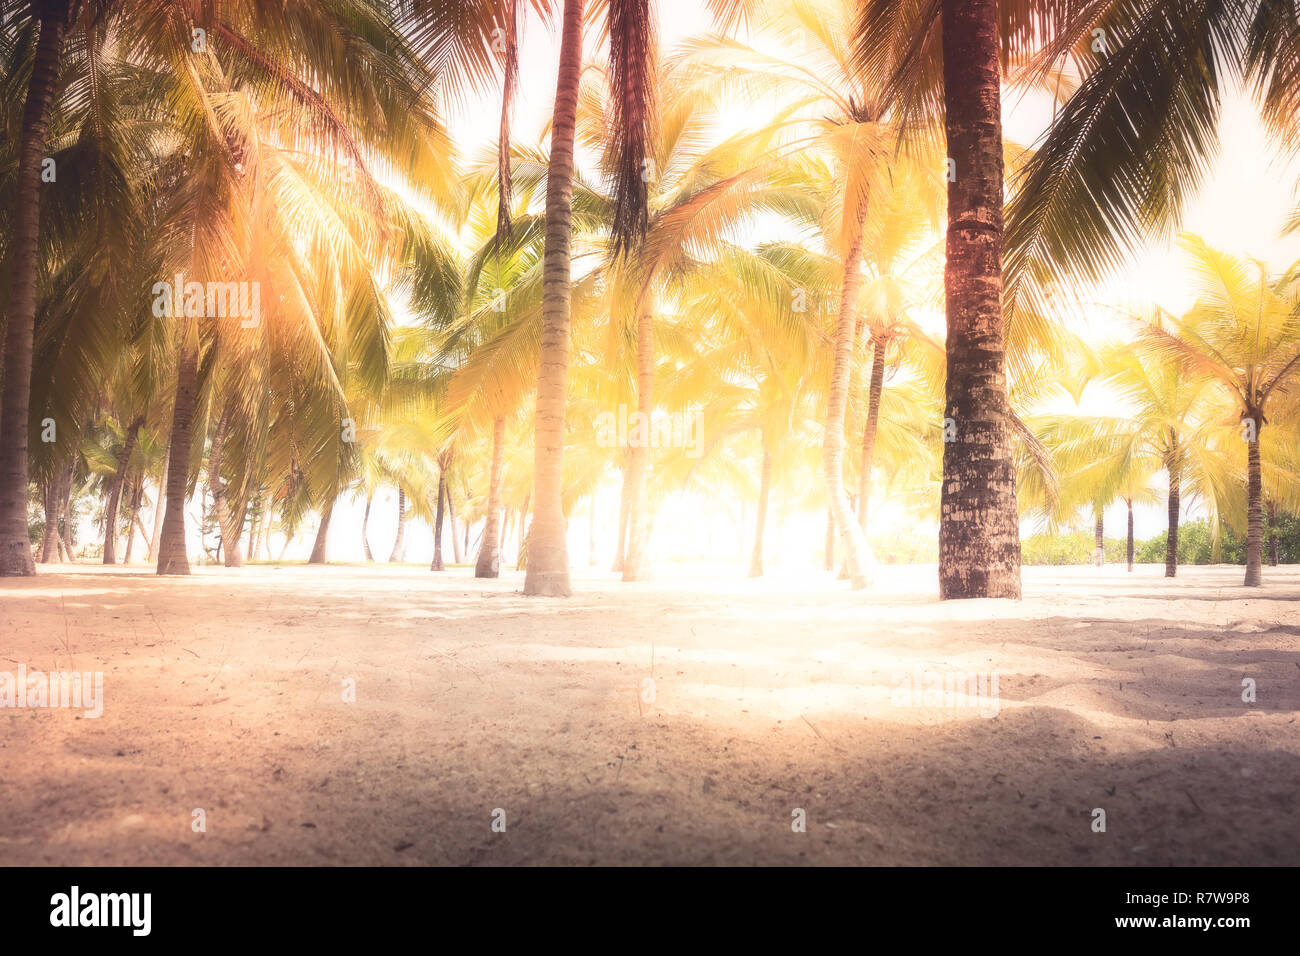 Beach palms trees sand bright sunlight background vintage style in yellow orange colors Stock Photo